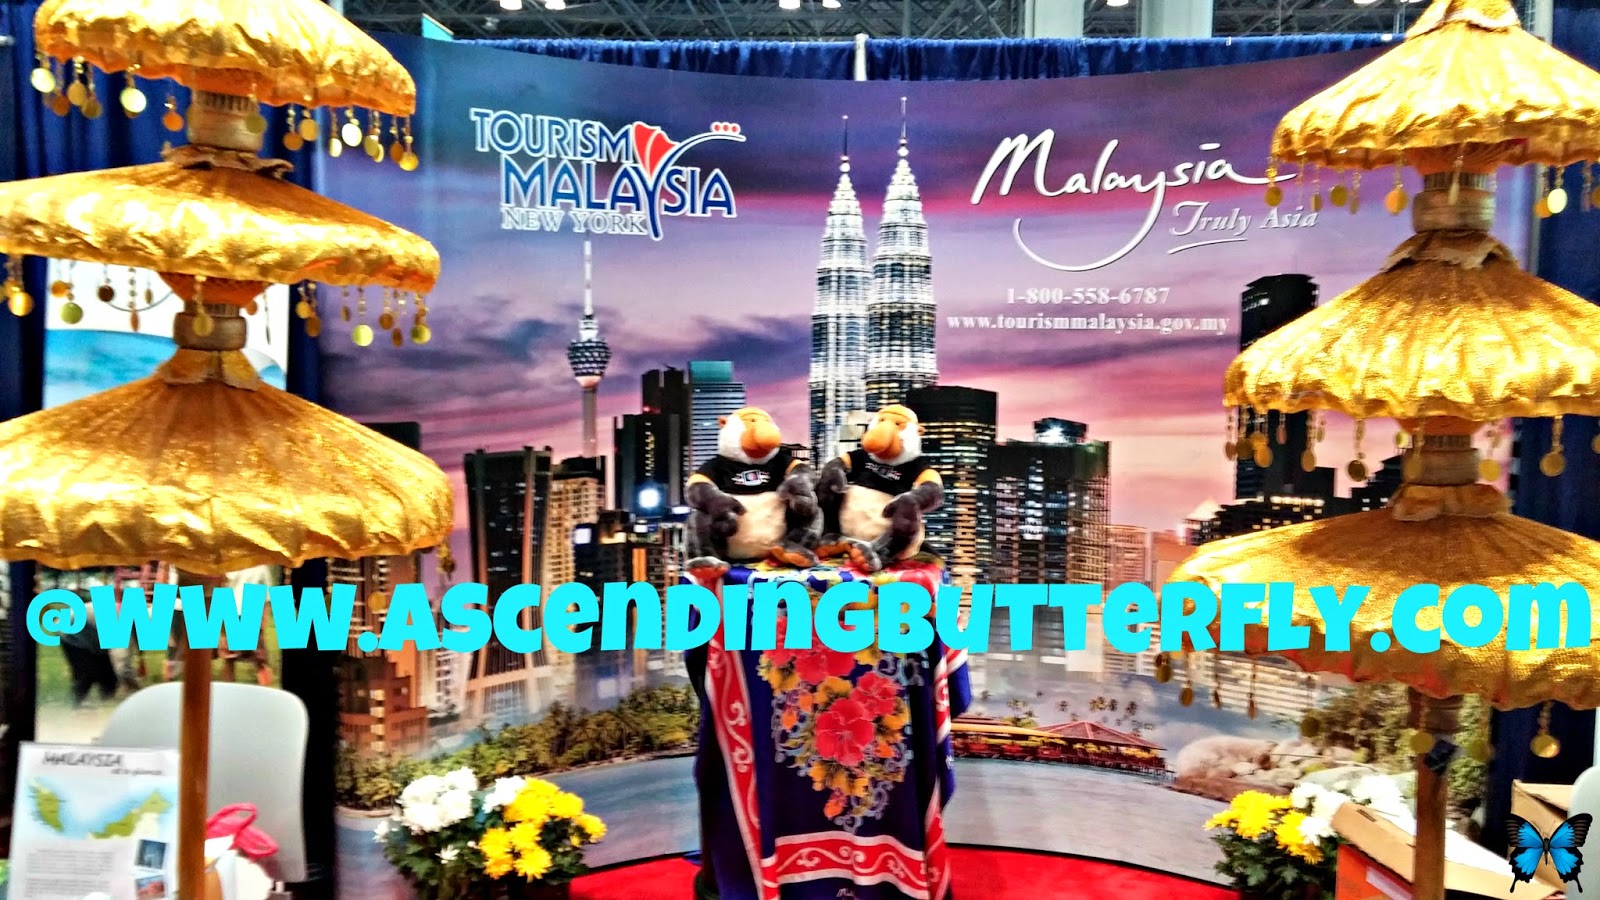 Tourism Malaysia display table at New York Times Travel Show